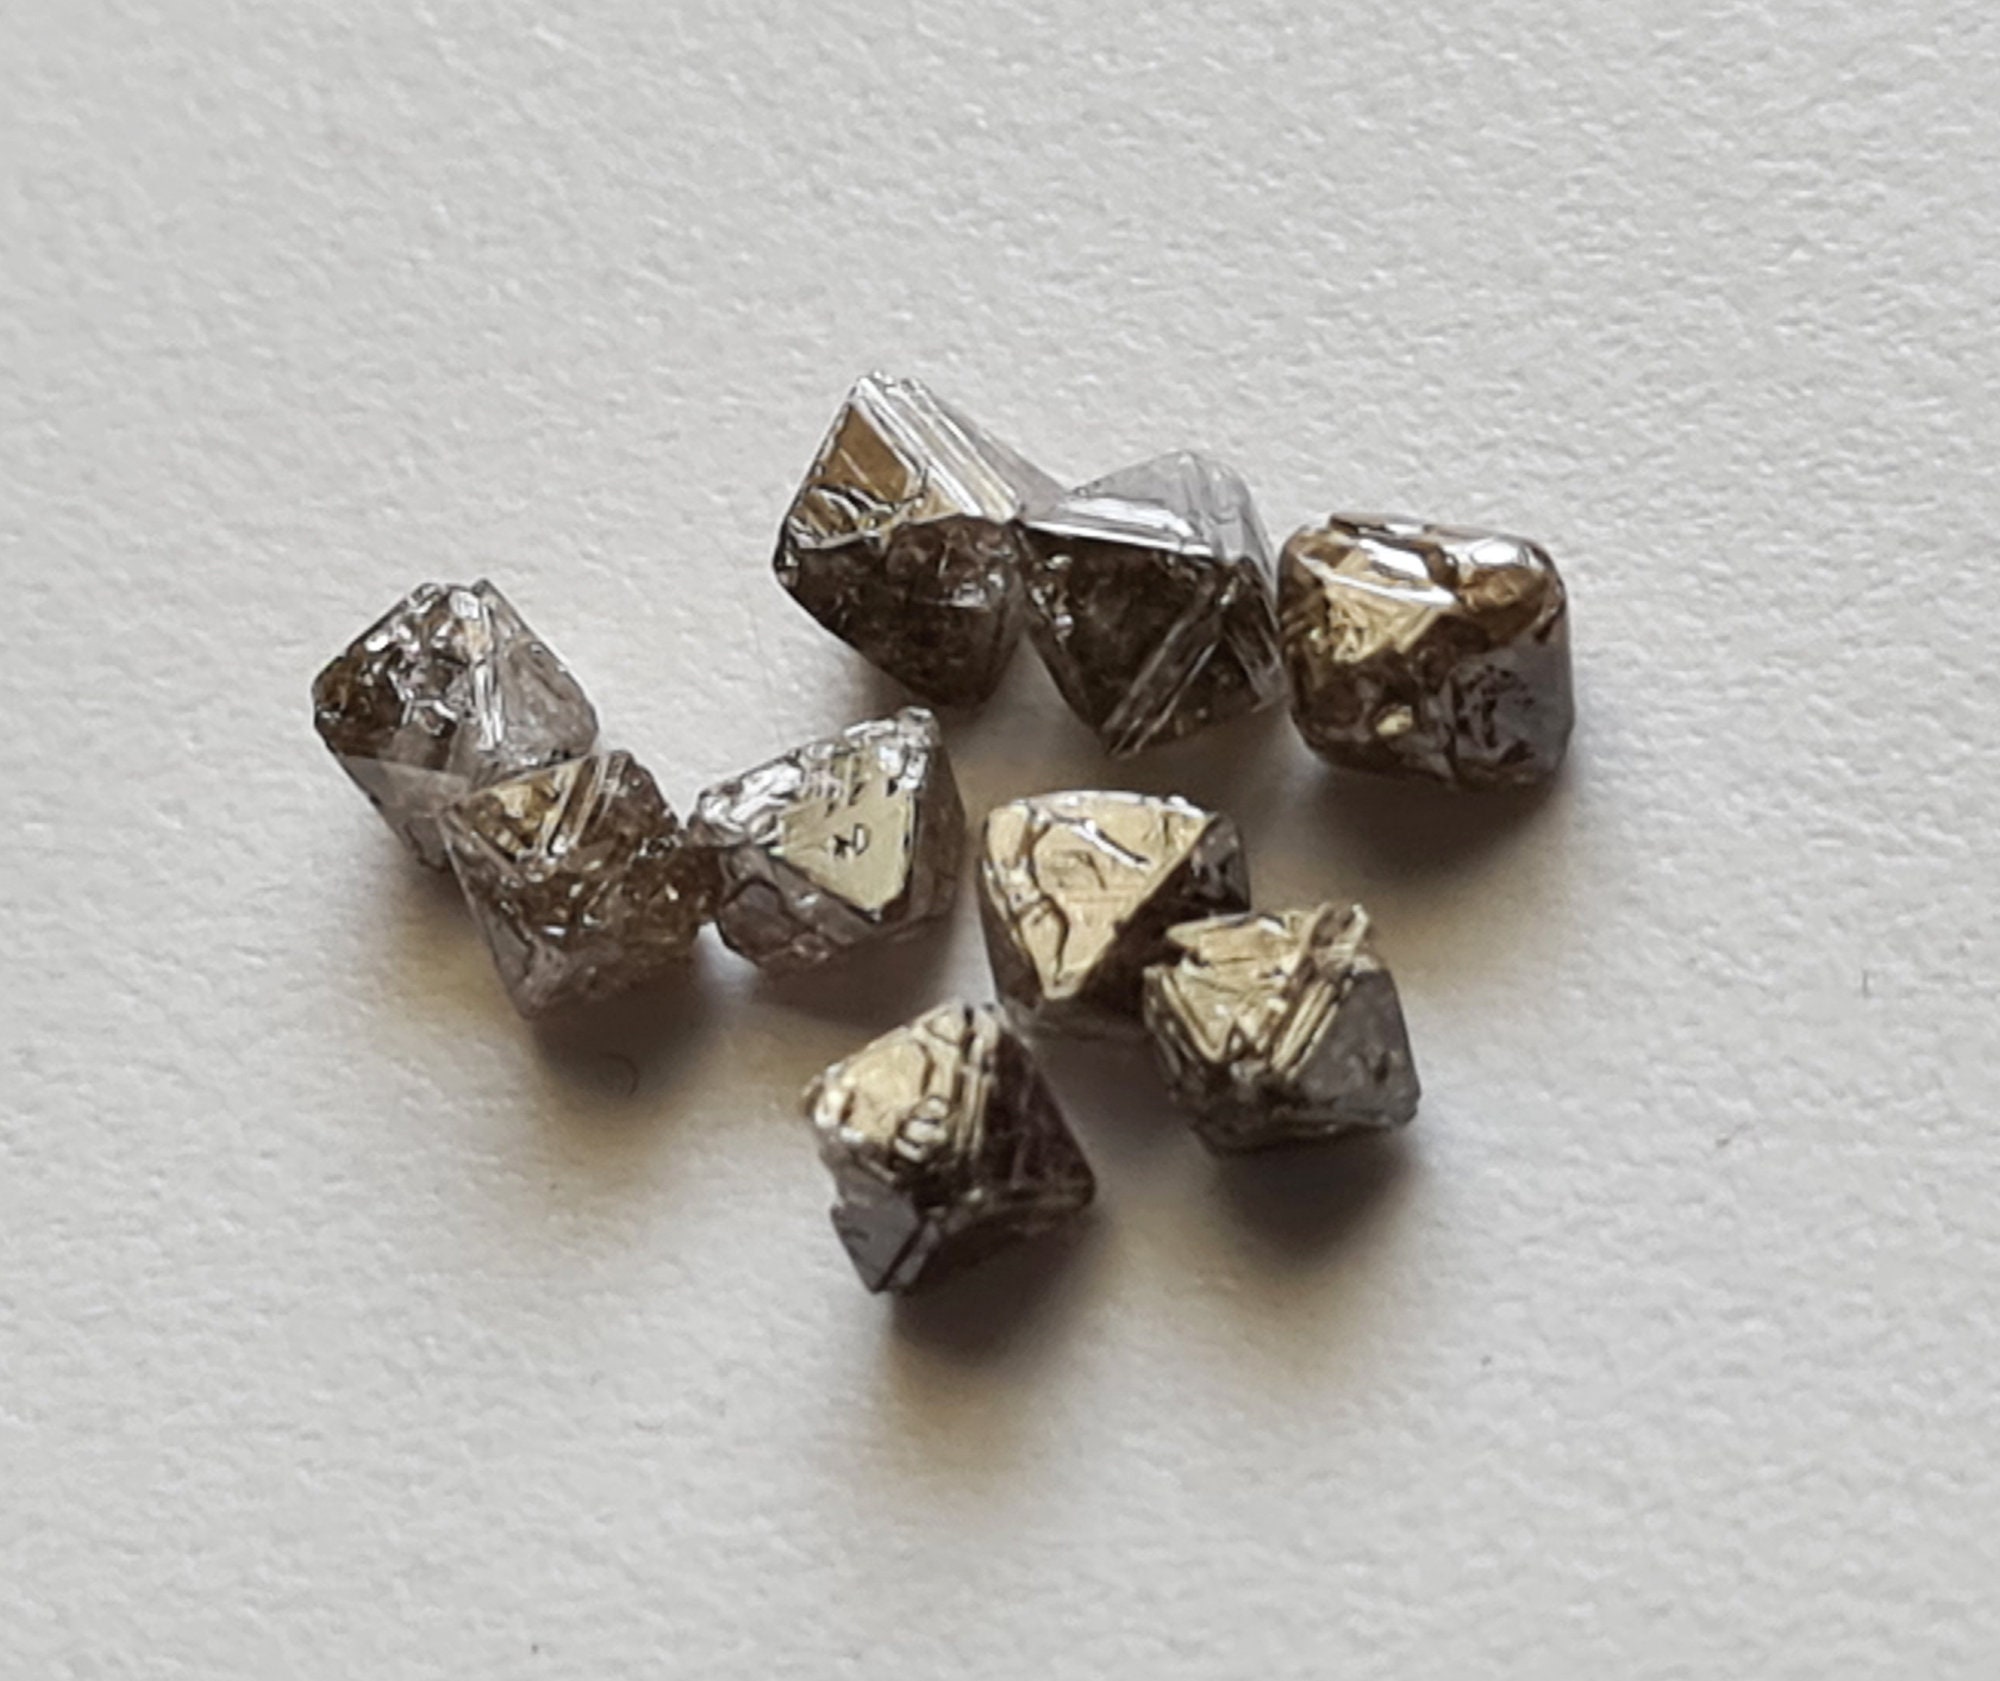 2-3mm Brown Rough Diamond Crystal, Raw Diamond, Uncut Diamond, Loose  Diamond, Diamond Octahedron for Jewelry 1cts to 5cts Options 